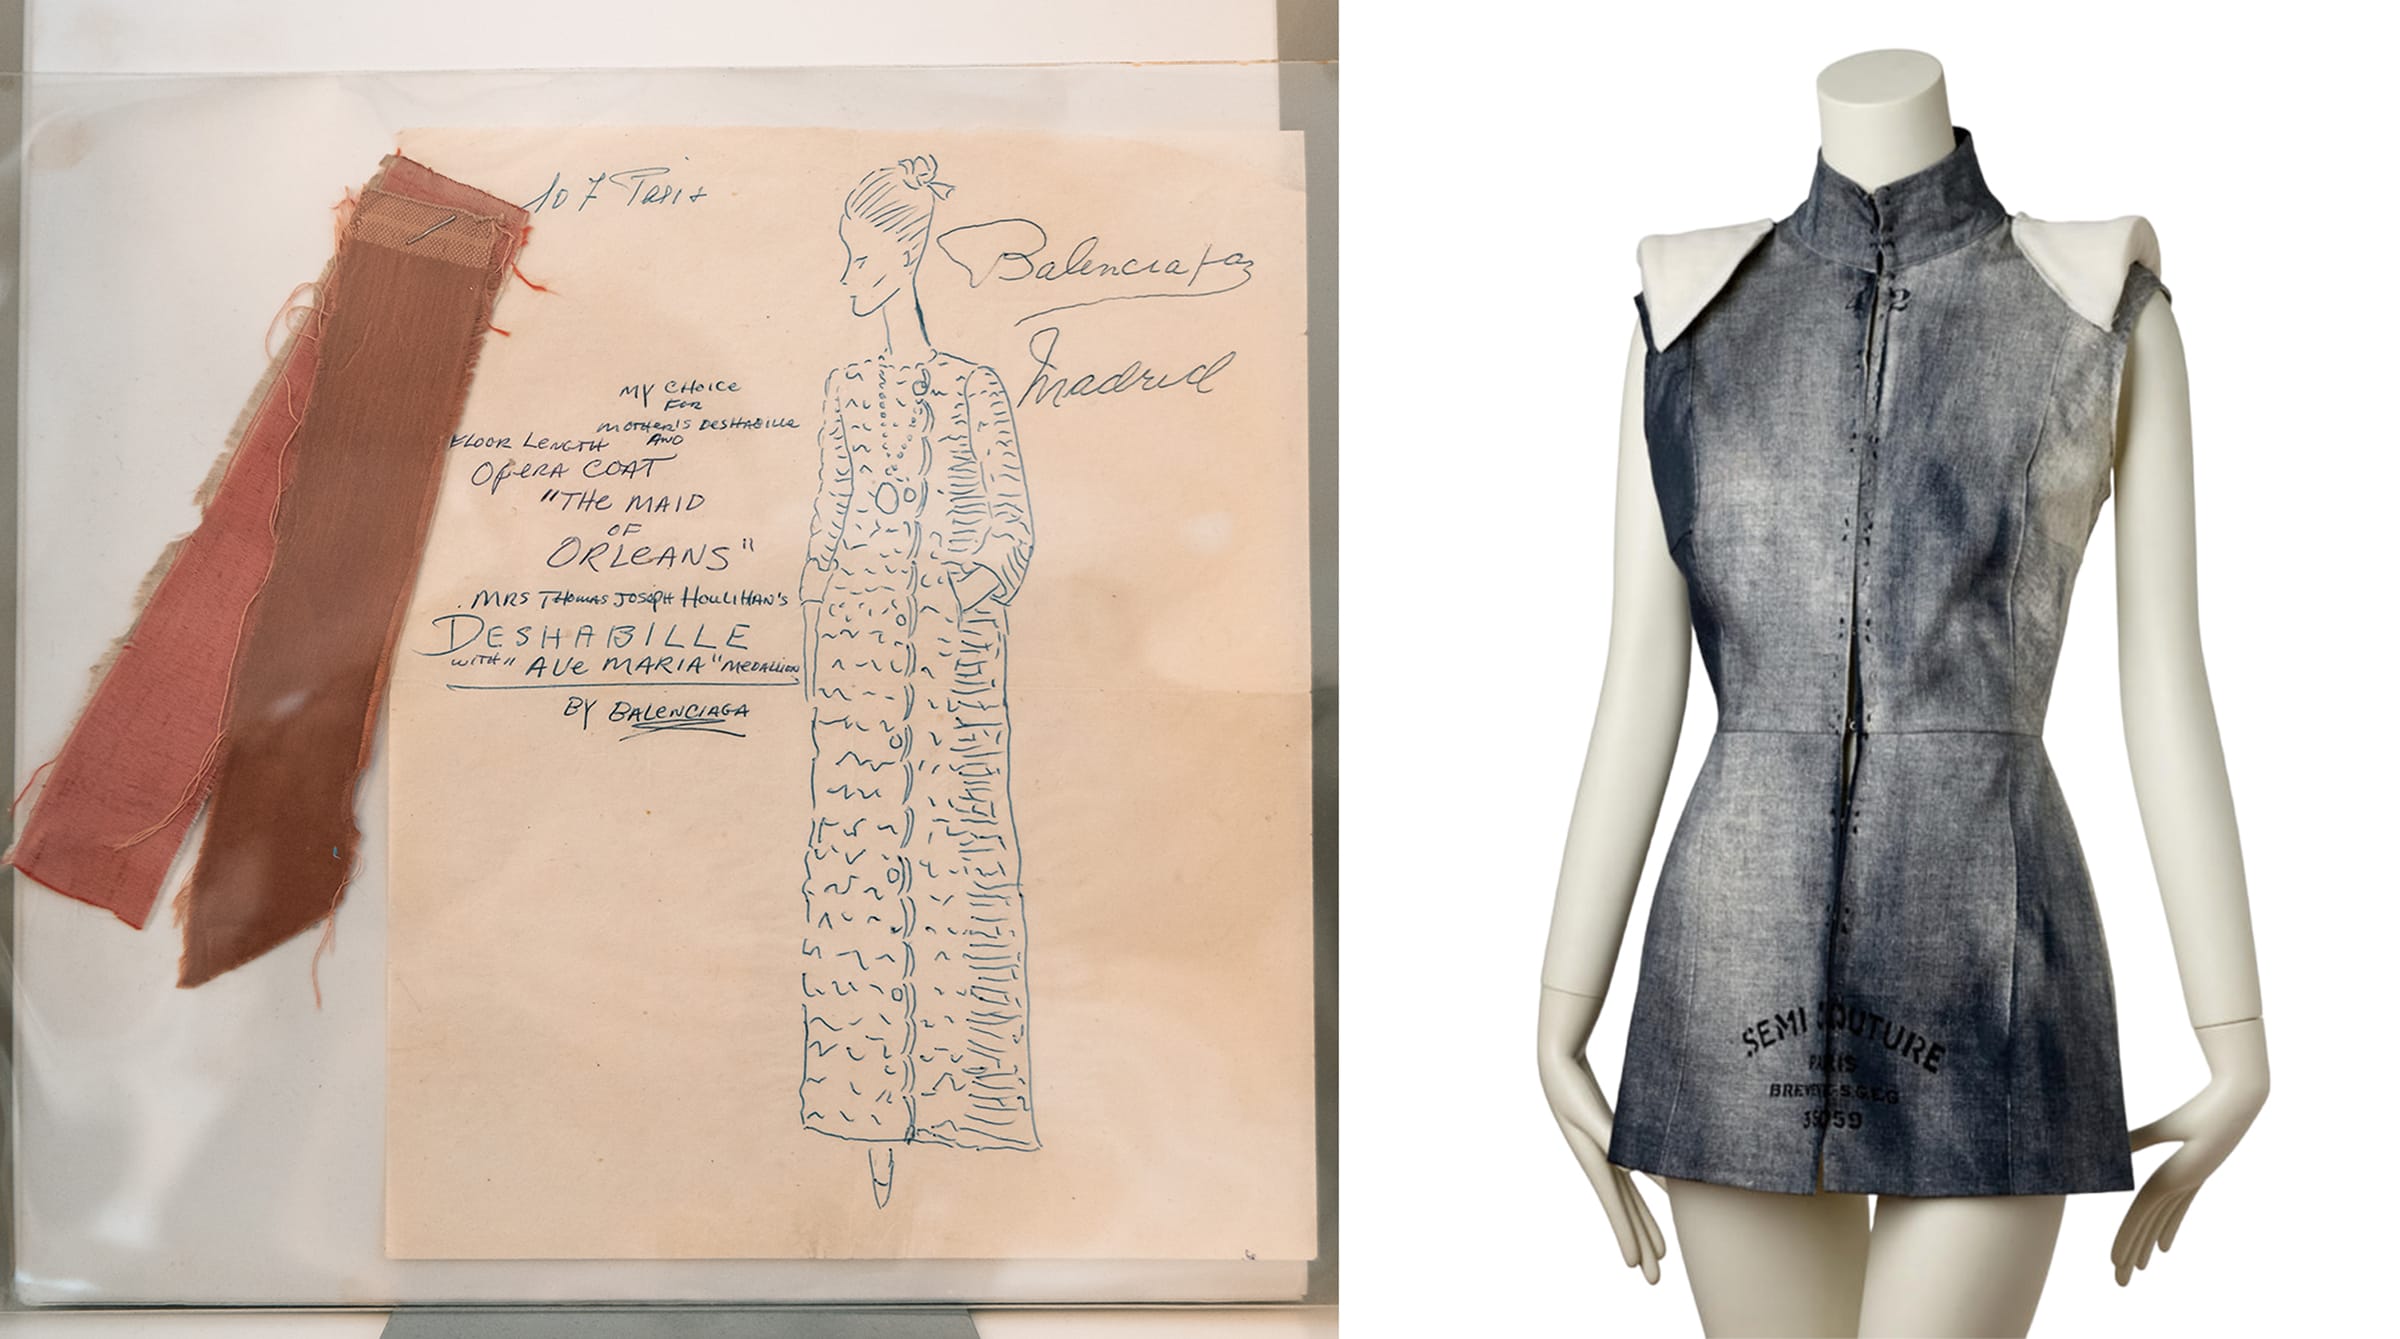 Left: A sketch for an evening coat with multiple silk swatches by Cristobal Balenciaga, 1963. Part of the Cristobal Balenciaga/EISA Document/Archive at Parodi Costume Collection. Photograph by Dave Meall. Right: Maison Martin Margiela, tromp l'oeil Stockman Jacket, spring/summer 1999. Photograph by Kerry Taylor Auctions. Both images courtesy of Parodi Costume Collection.